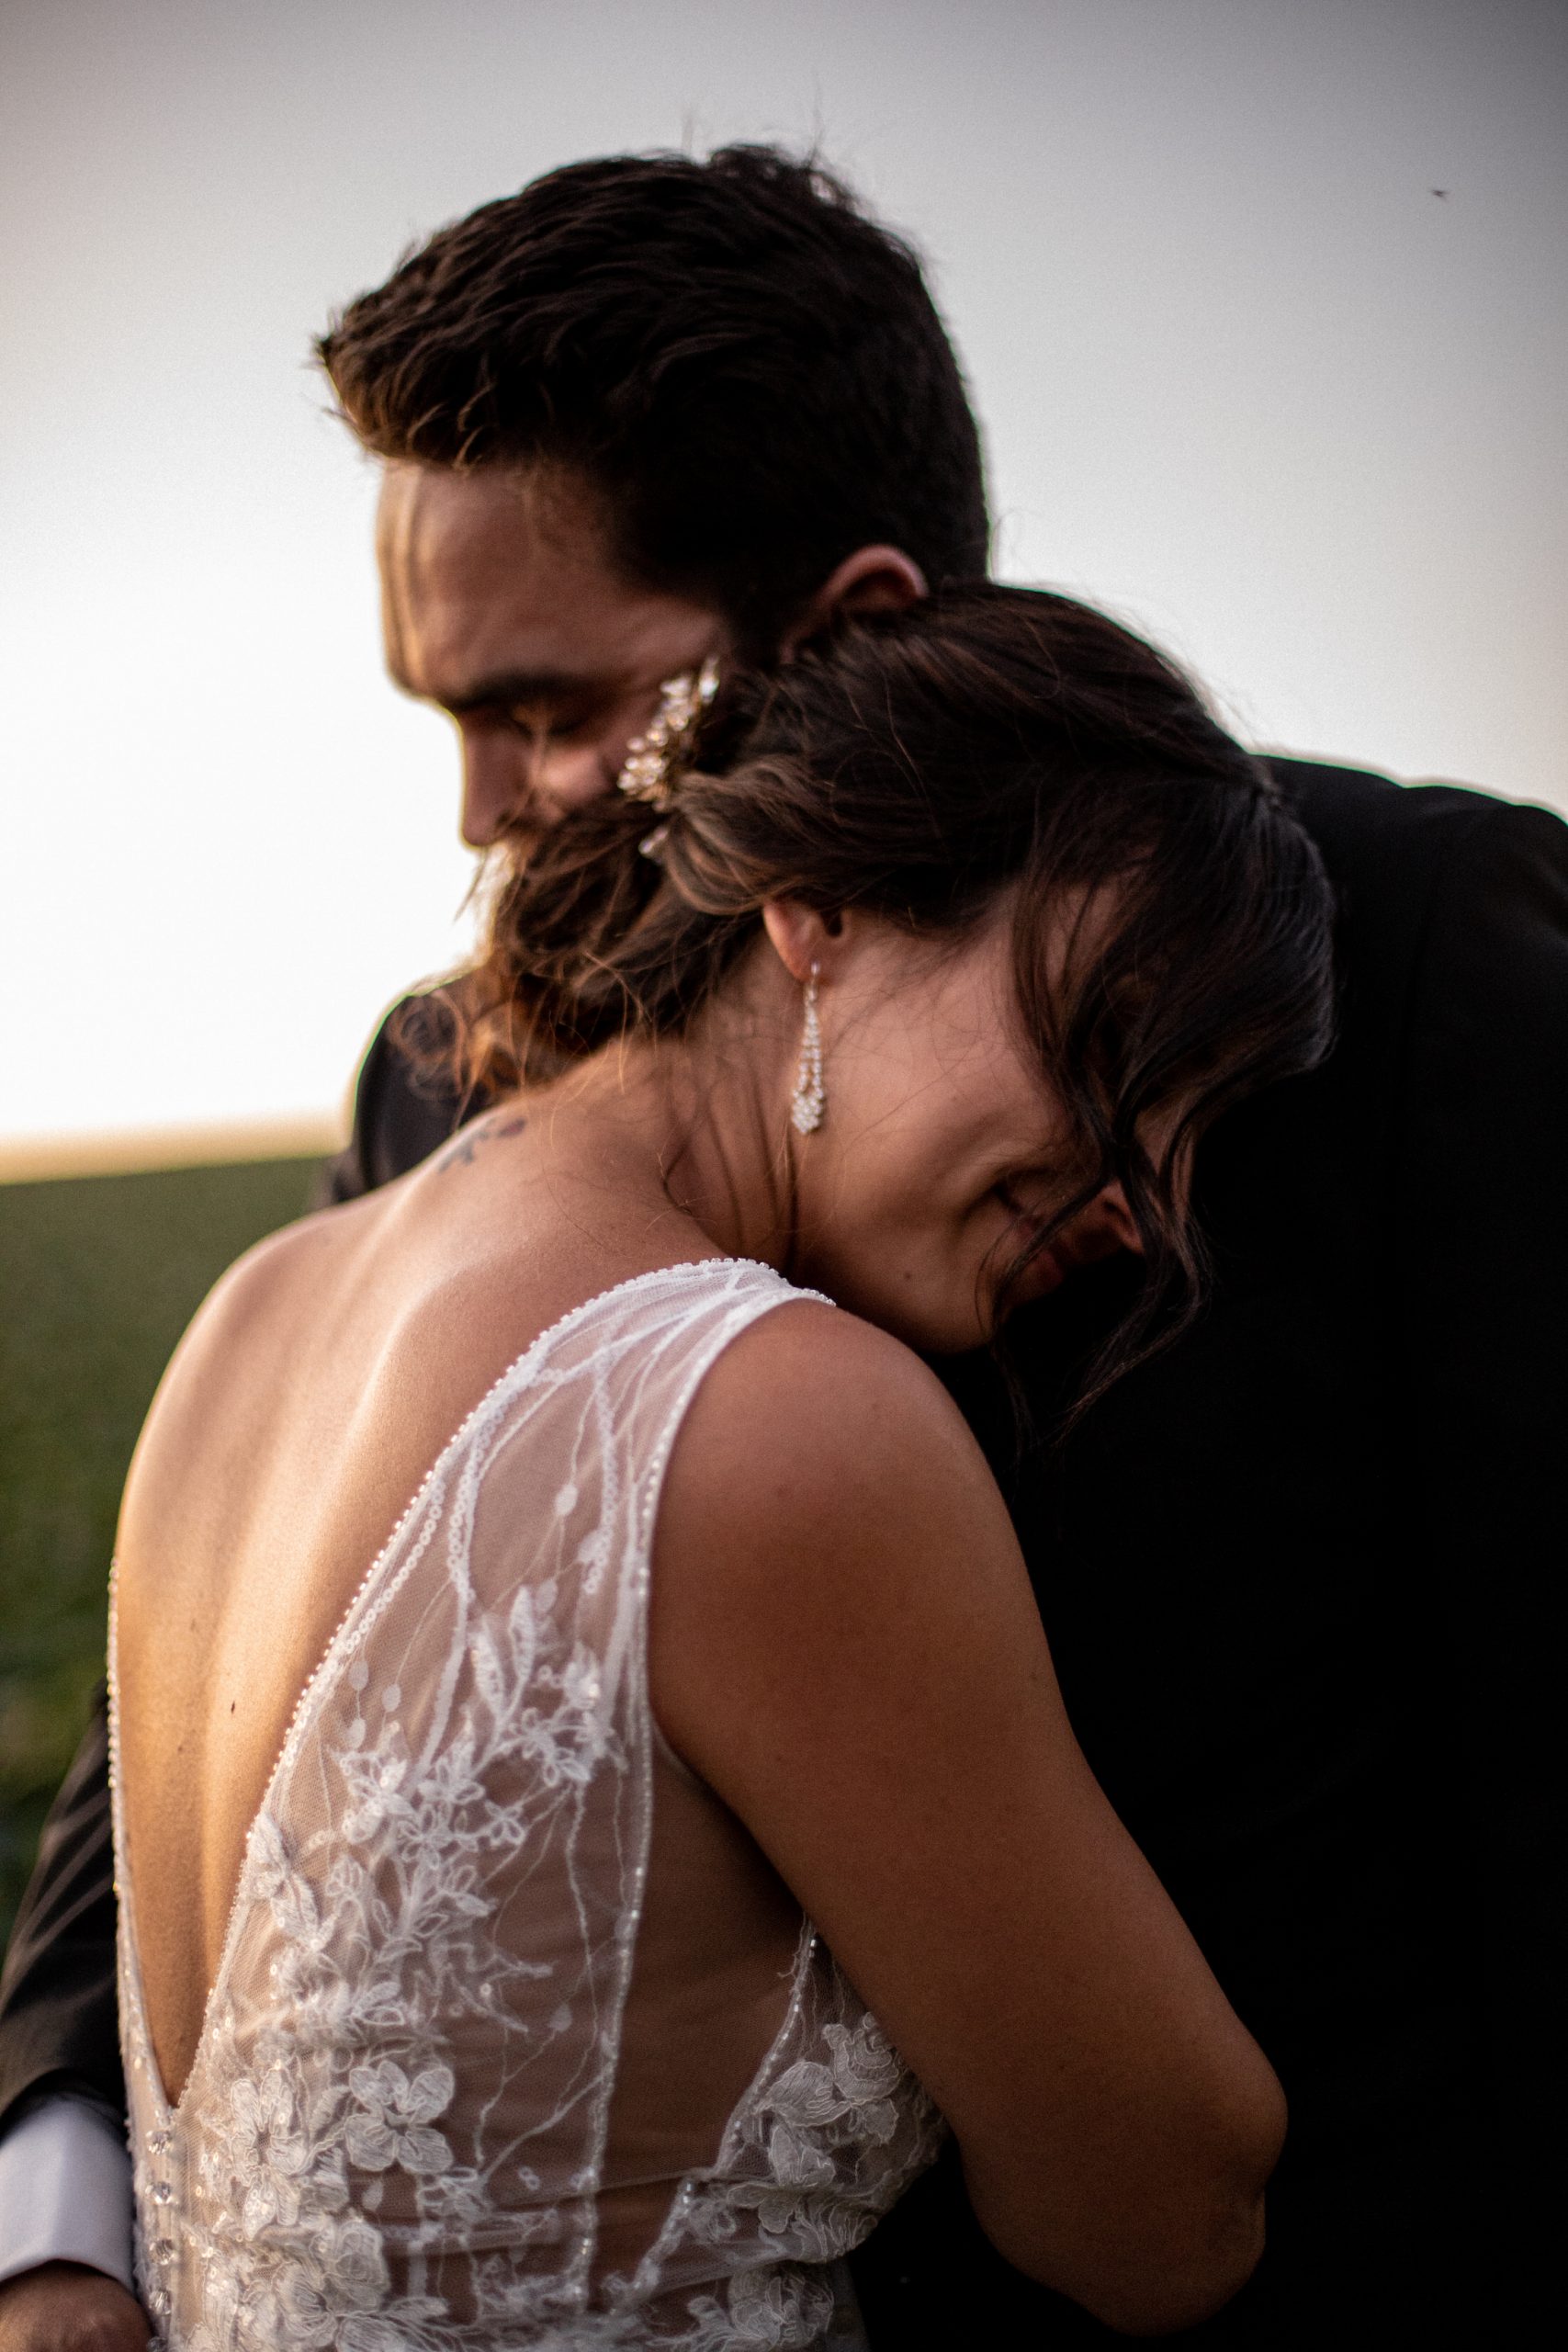 Bride and groom portraits at sunset.